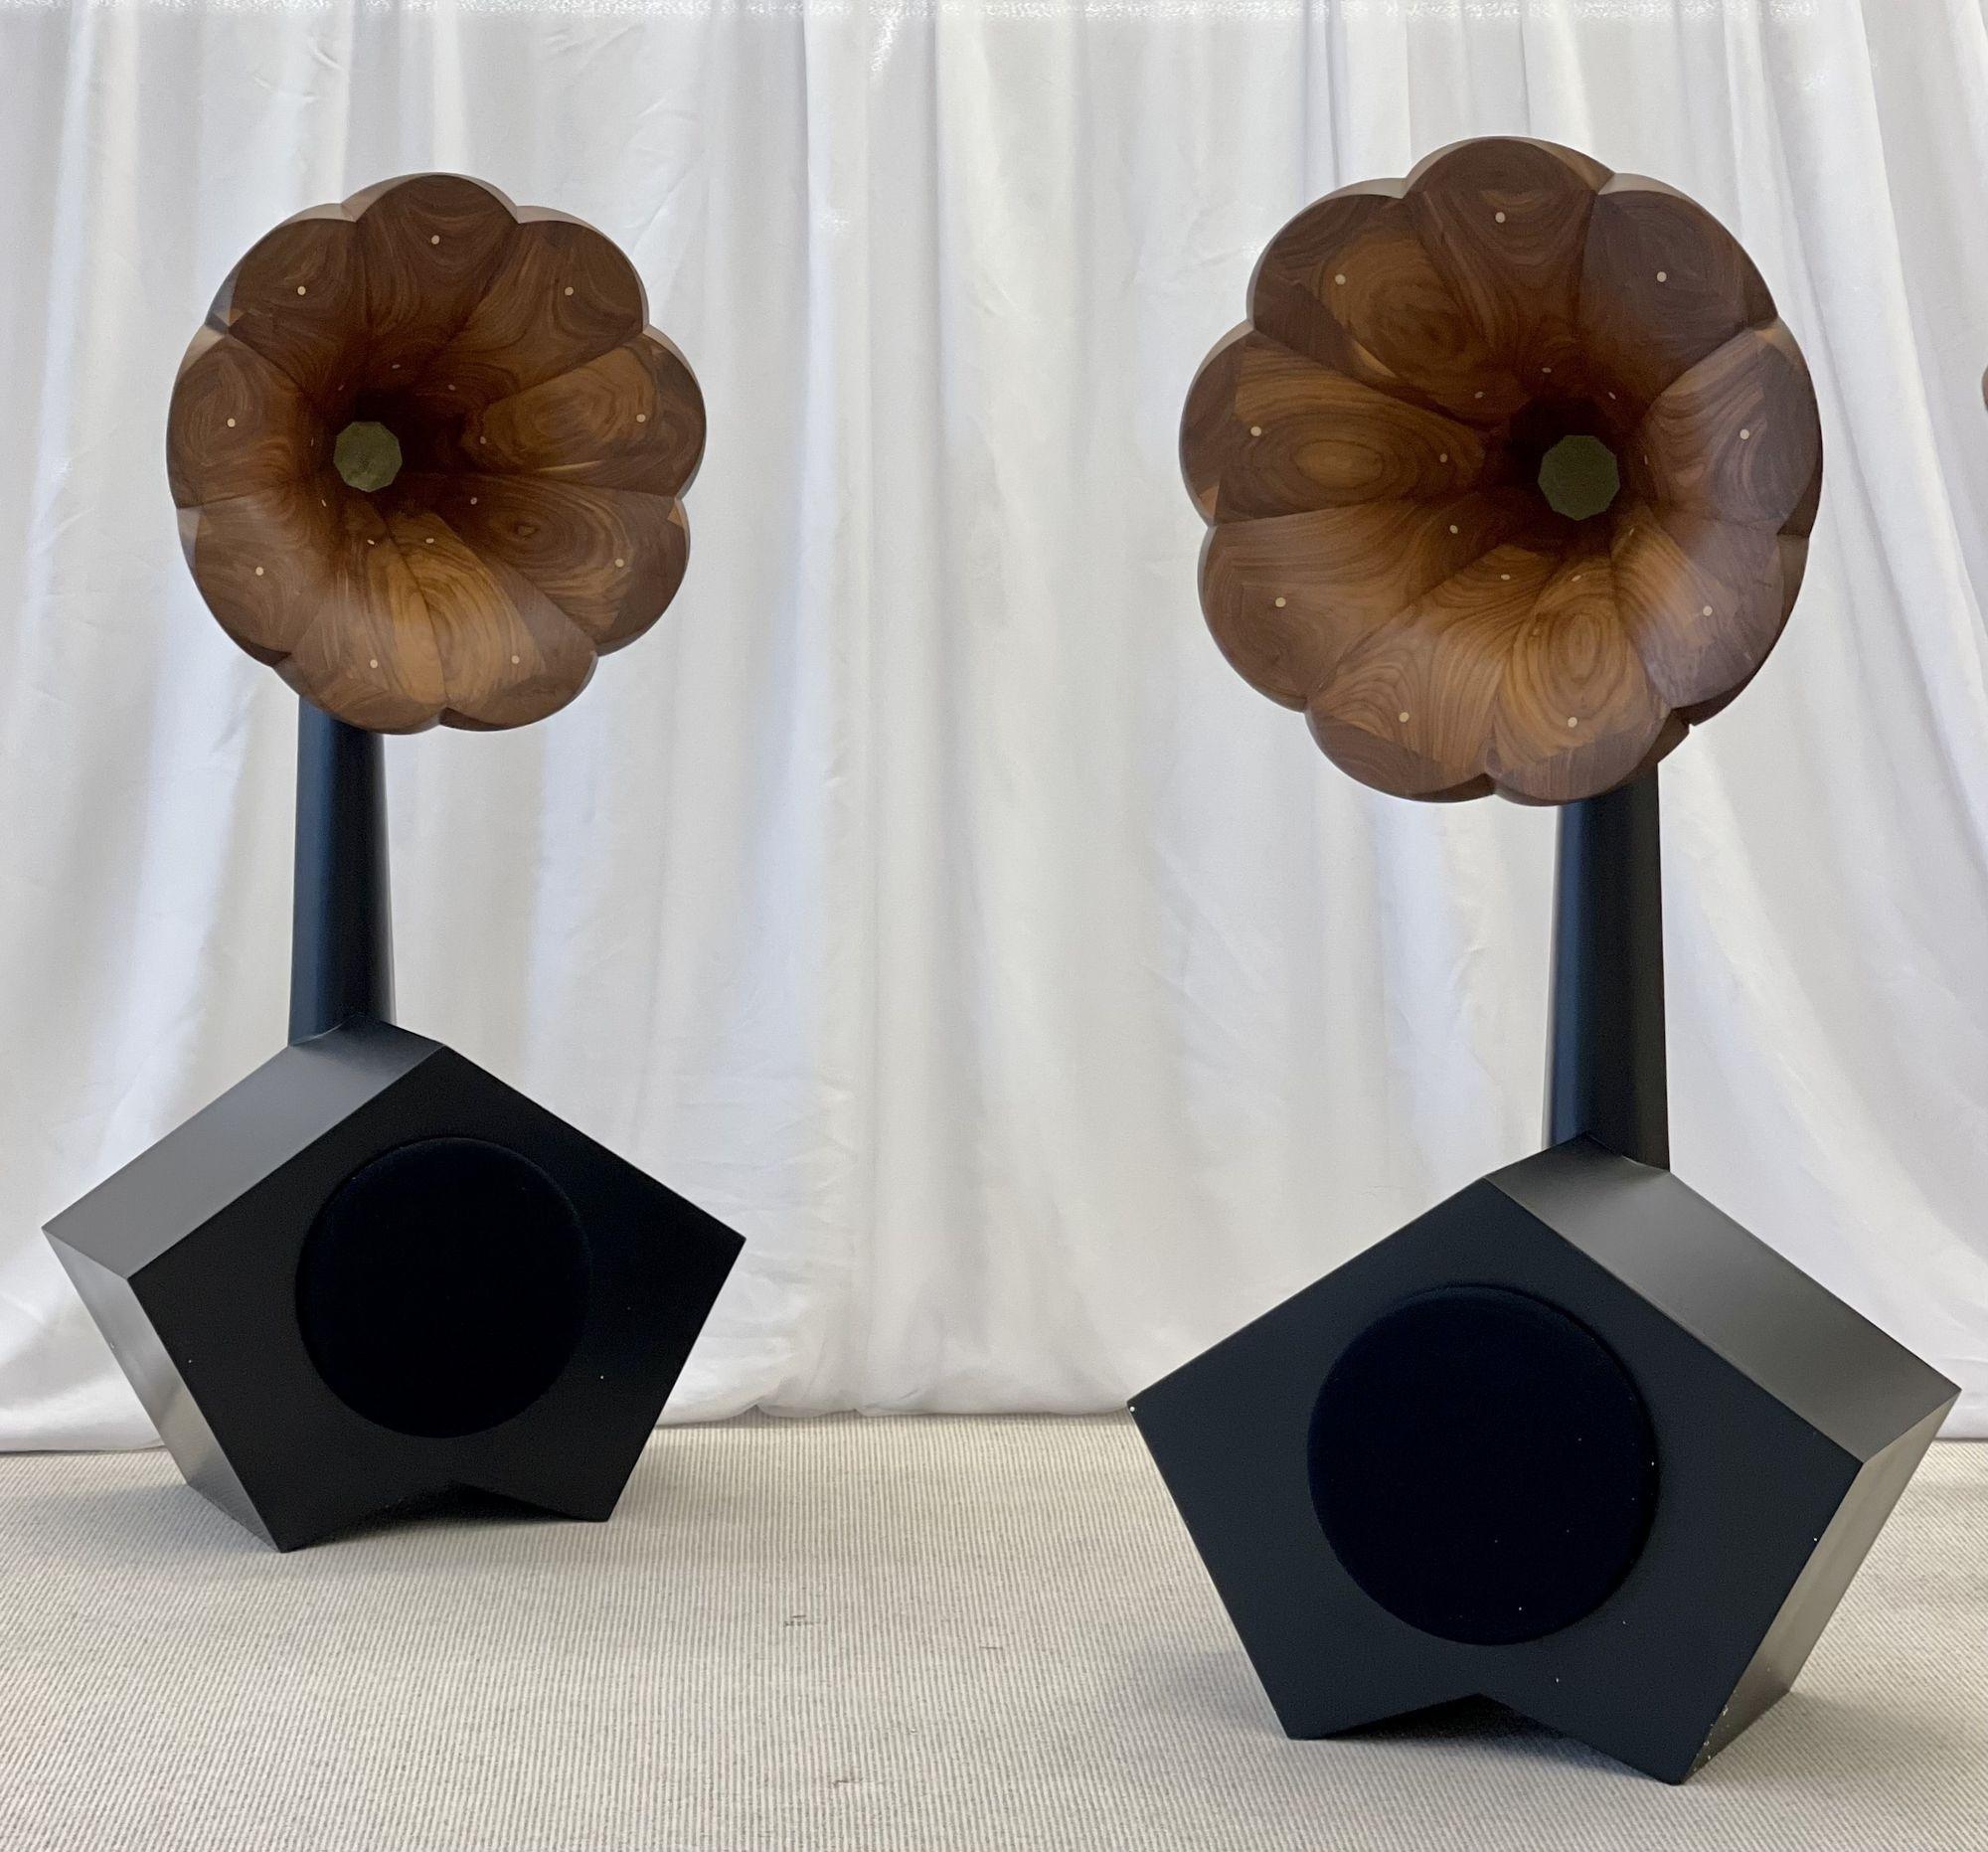 Pair solid wood horn floor standing high fidelity speakers Model FS-1 by A for Ara. Available immediately
 
A fine walnut dot inlaid horn on an ebony base with amplifier. 
 
An embrace with the art of high fidelity sound. Aesthetically inspired,